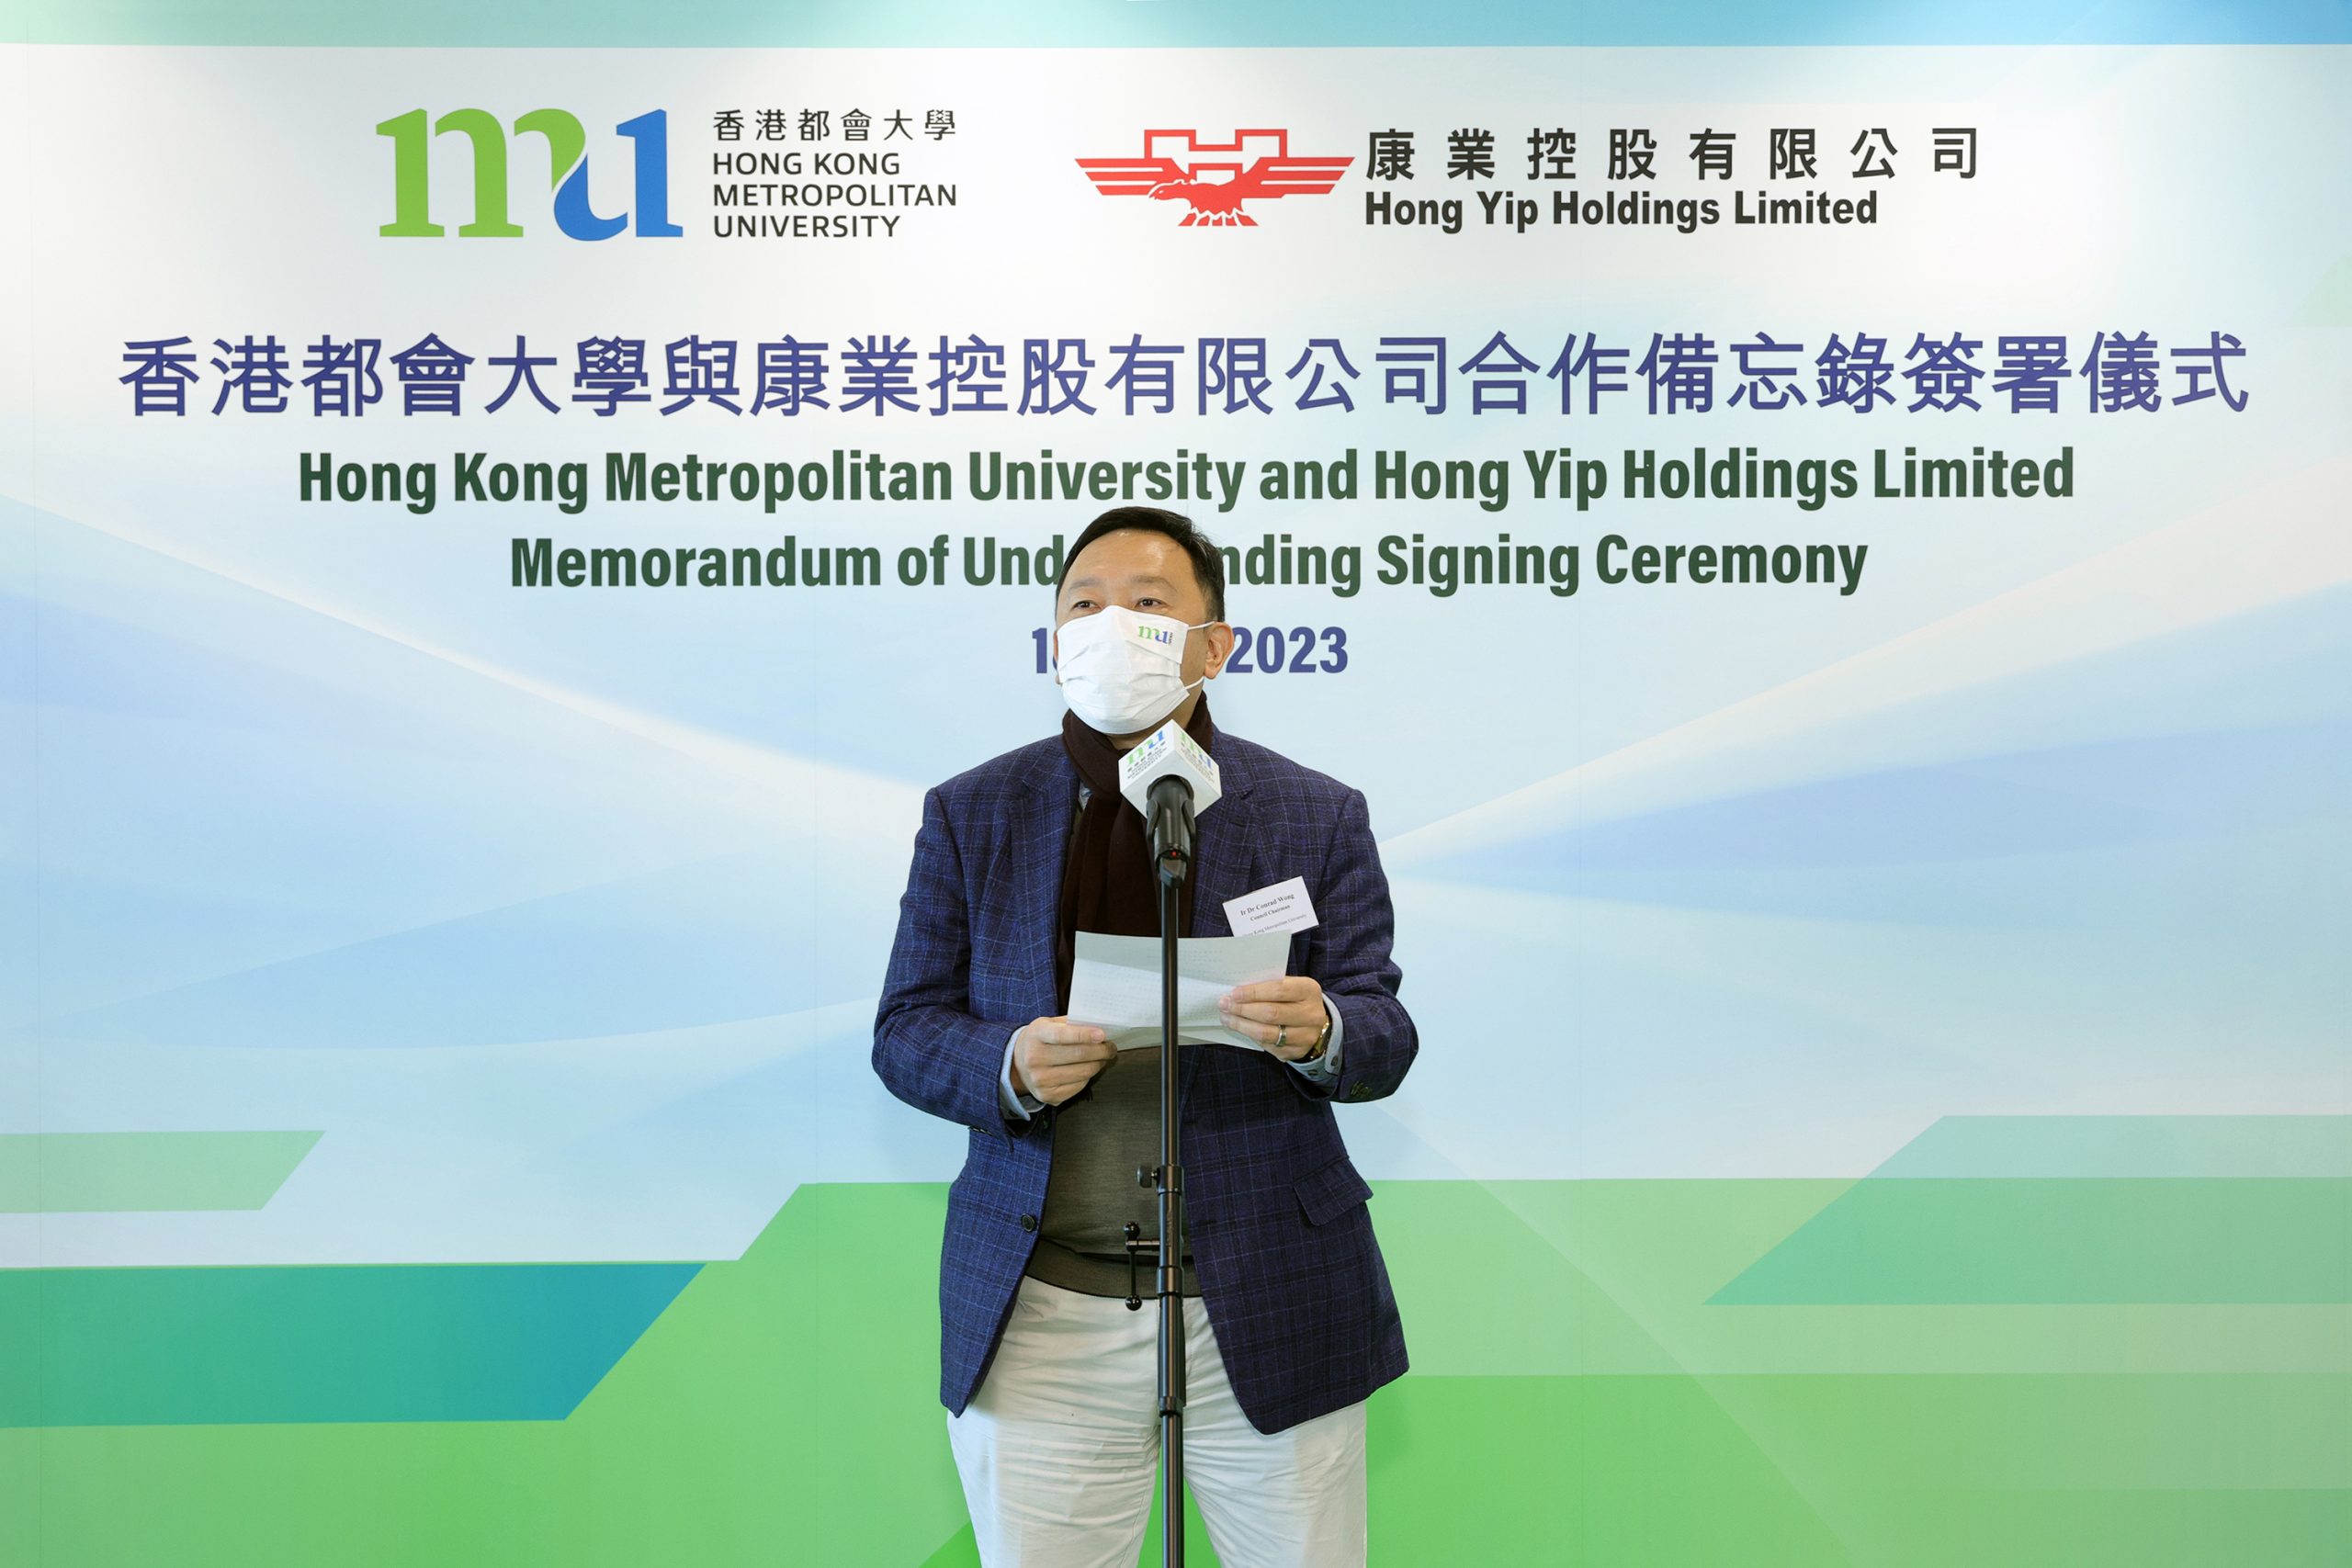 At the signing ceremony, Ir Dr Wong says that HKMU is committed to offering top quality professional programmes that are tailored to meet industry needs and provide students with clear career paths.